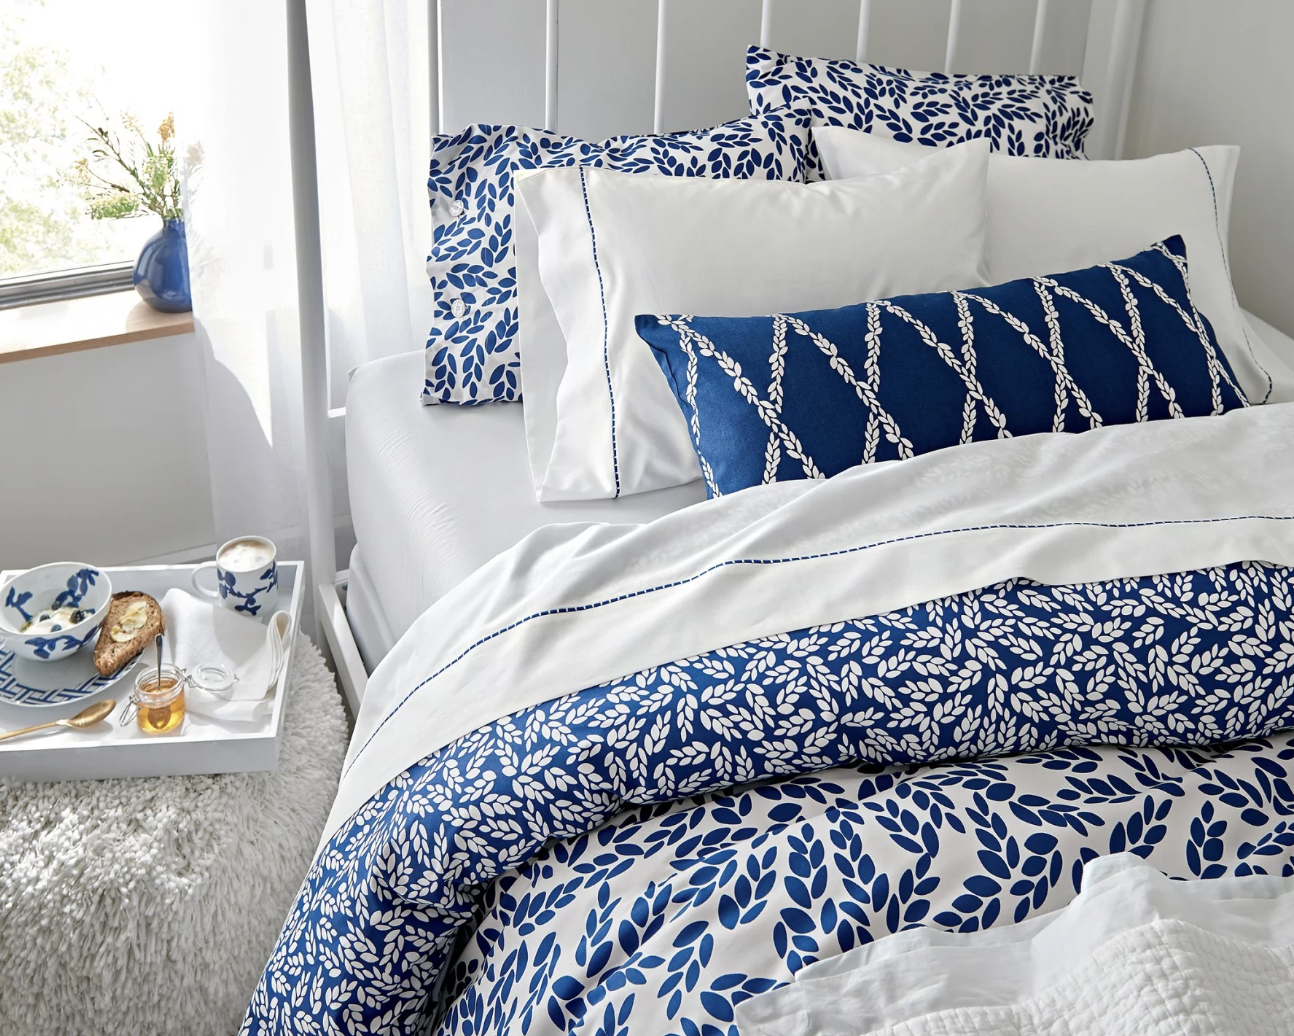 Reese Witherspoon Has A Draper James Bedding Collection With Crate